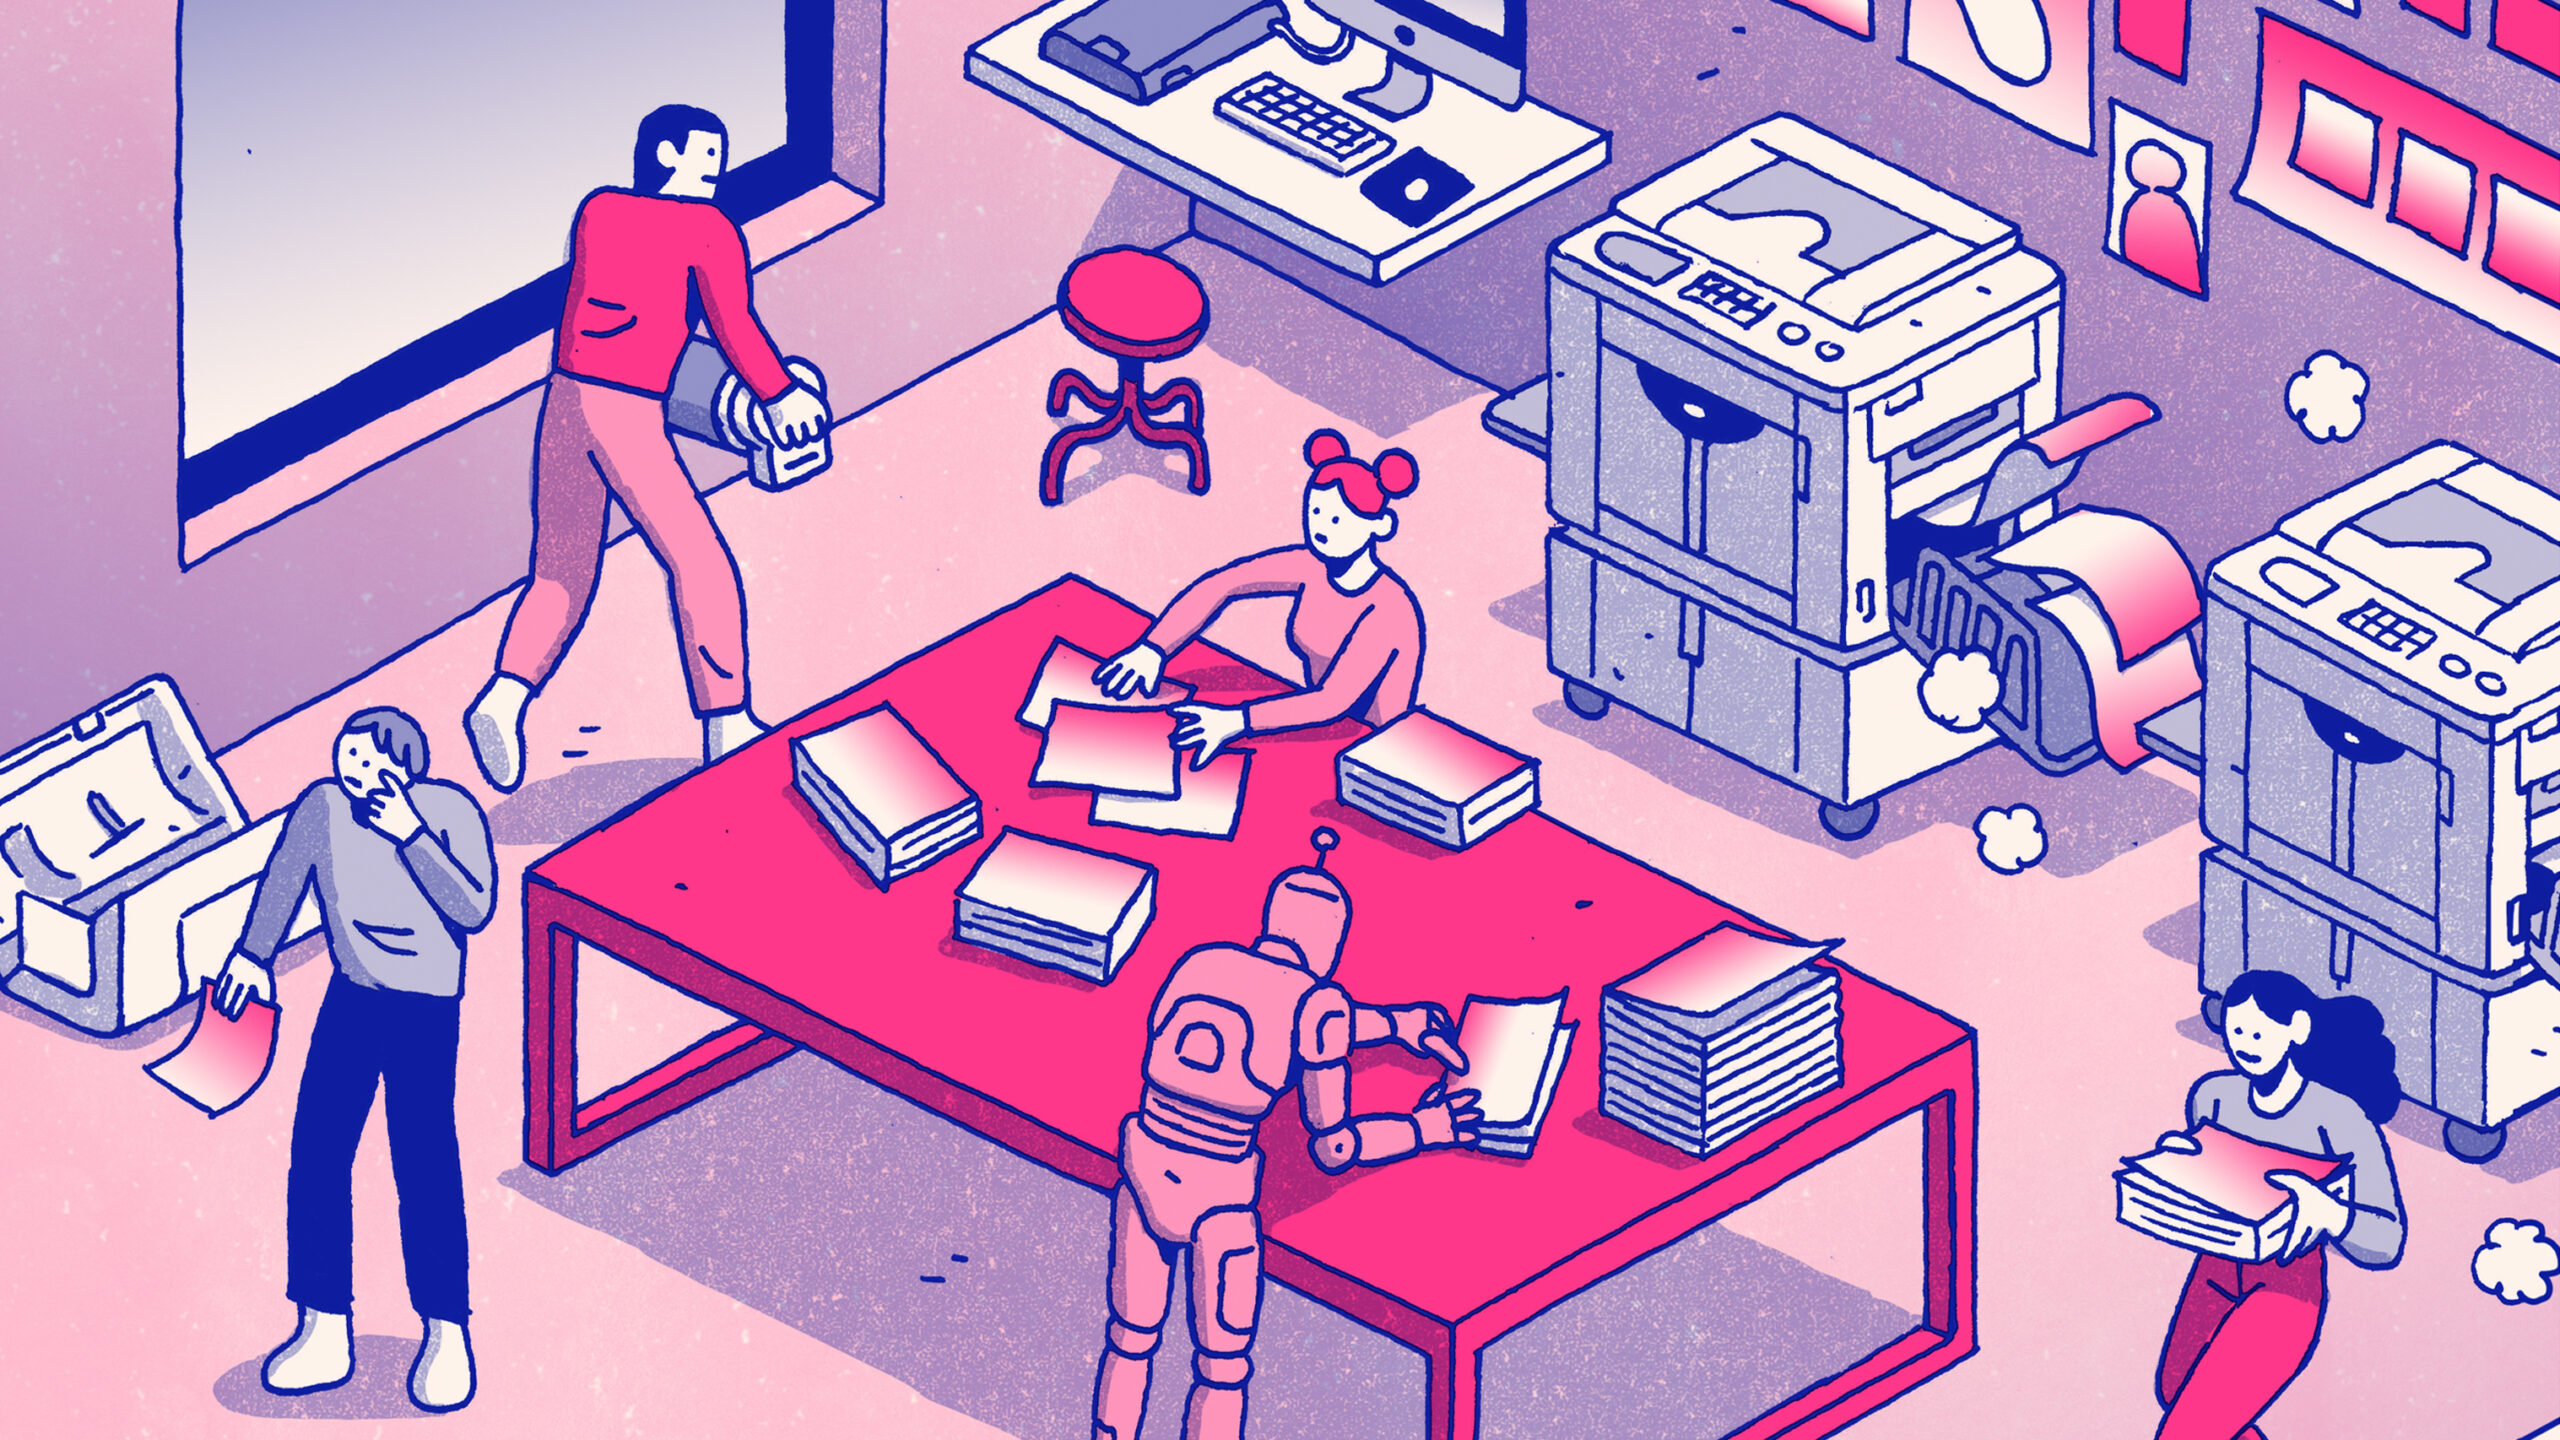 Riso printed illustration showing humans and robots working in a riso studio, printed in pink and blue.